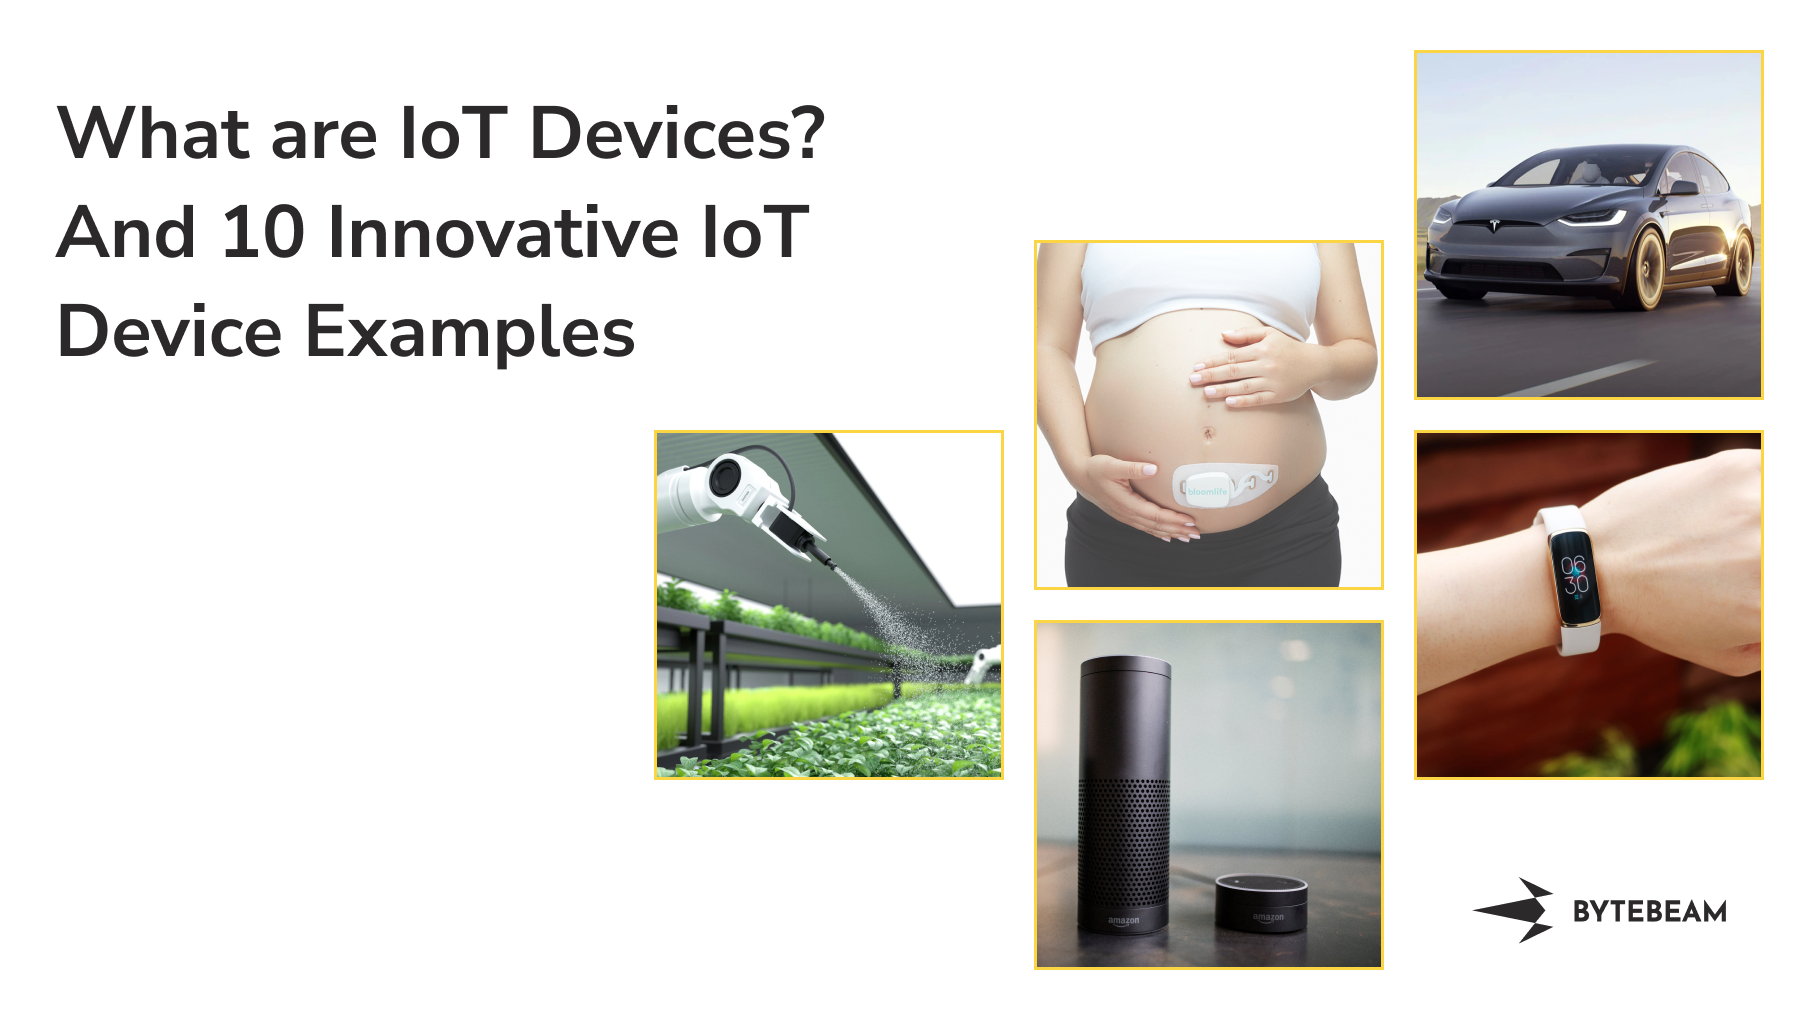 What are IoT Devices? And 10 Innovative IoT Device Examples